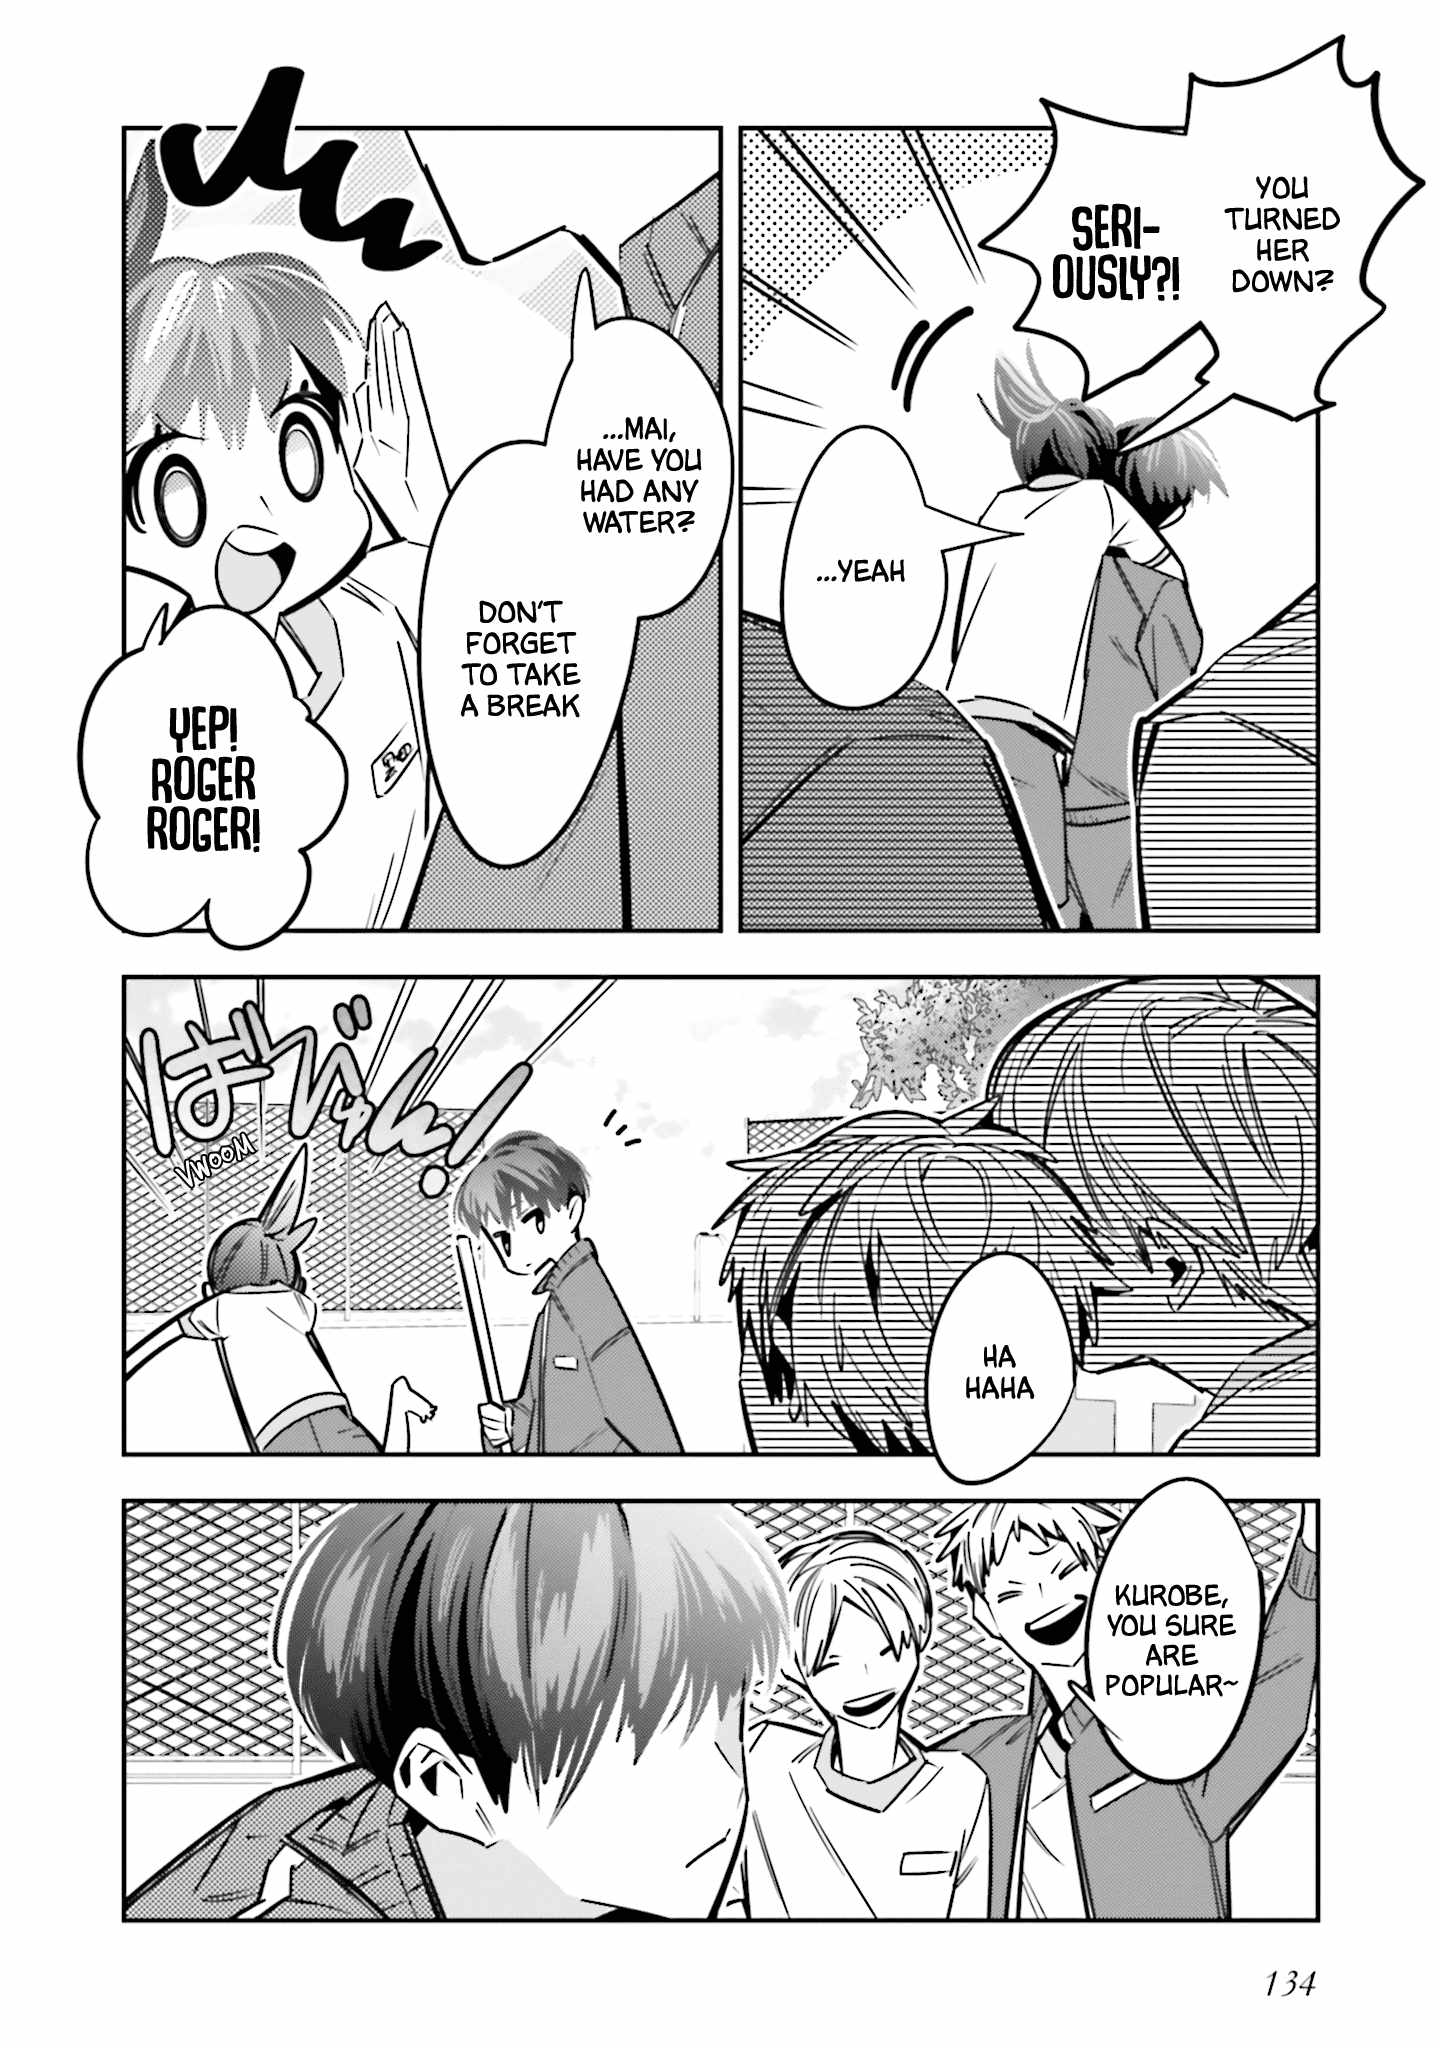 I Reincarnated as the Little Sister of a Death Game Manga's Murd3r Mastermind and Failed Chapter 13-5-eng-li - Page 3